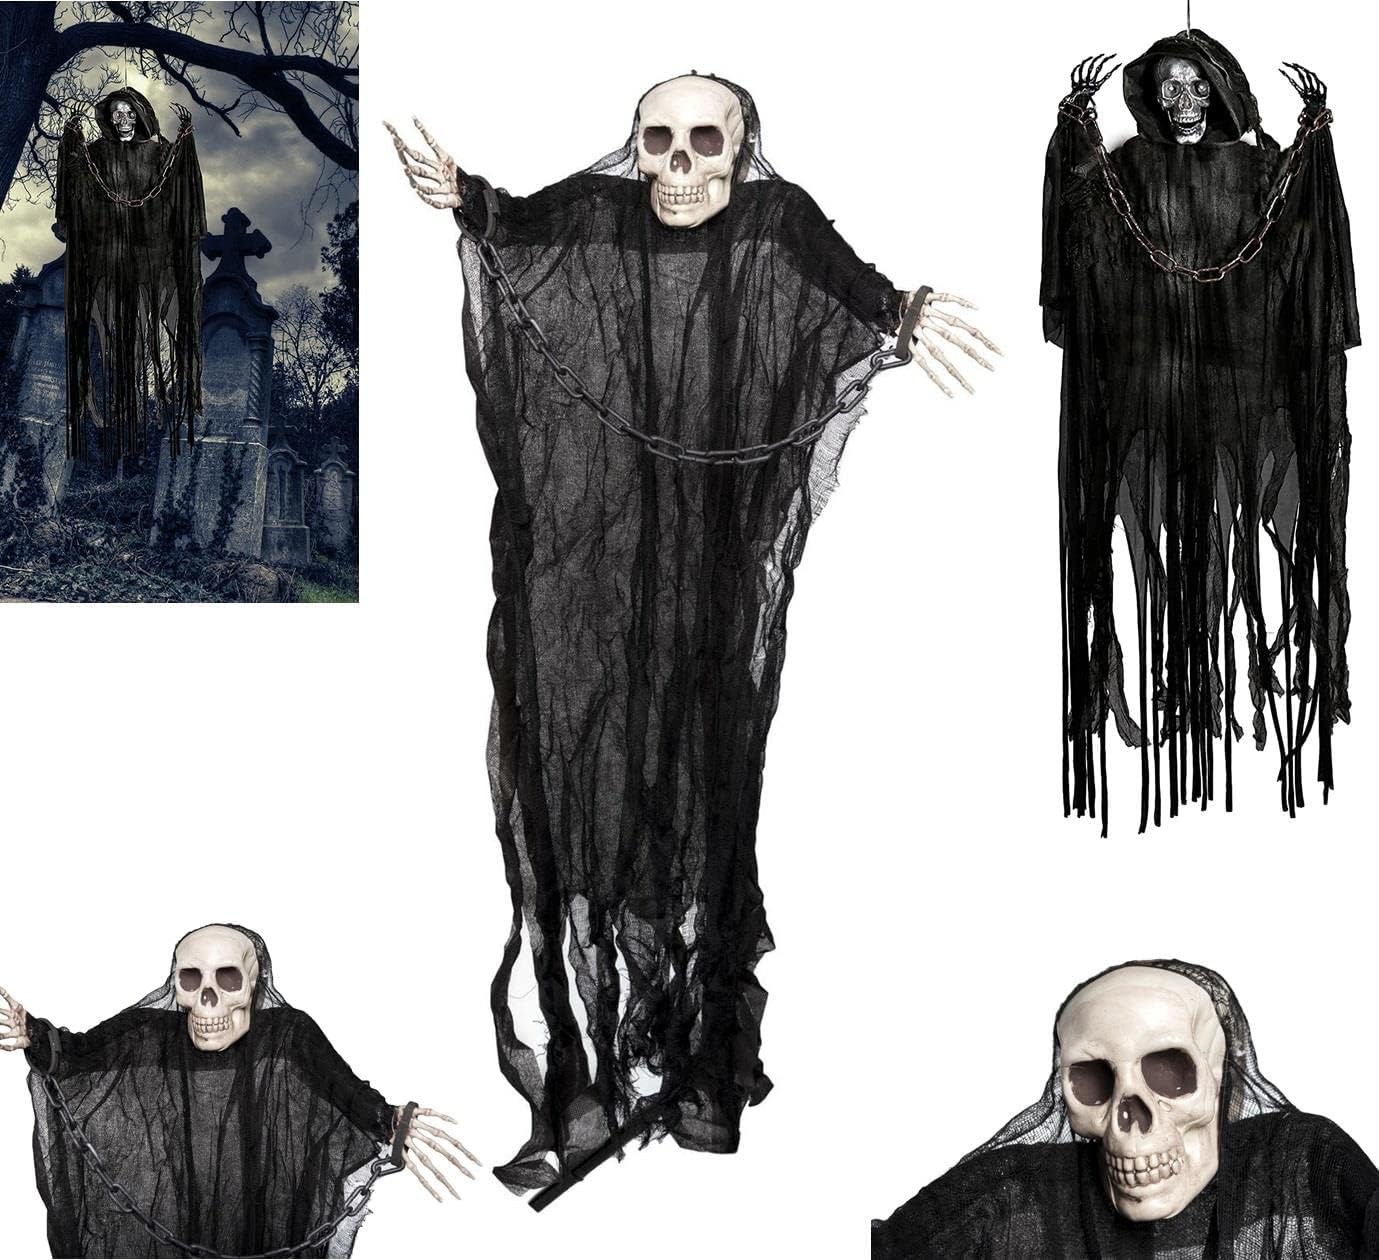 Hanging Ghost Skeleton Halloween Decor 90cm Chain Spooky Prop with Chained Arms